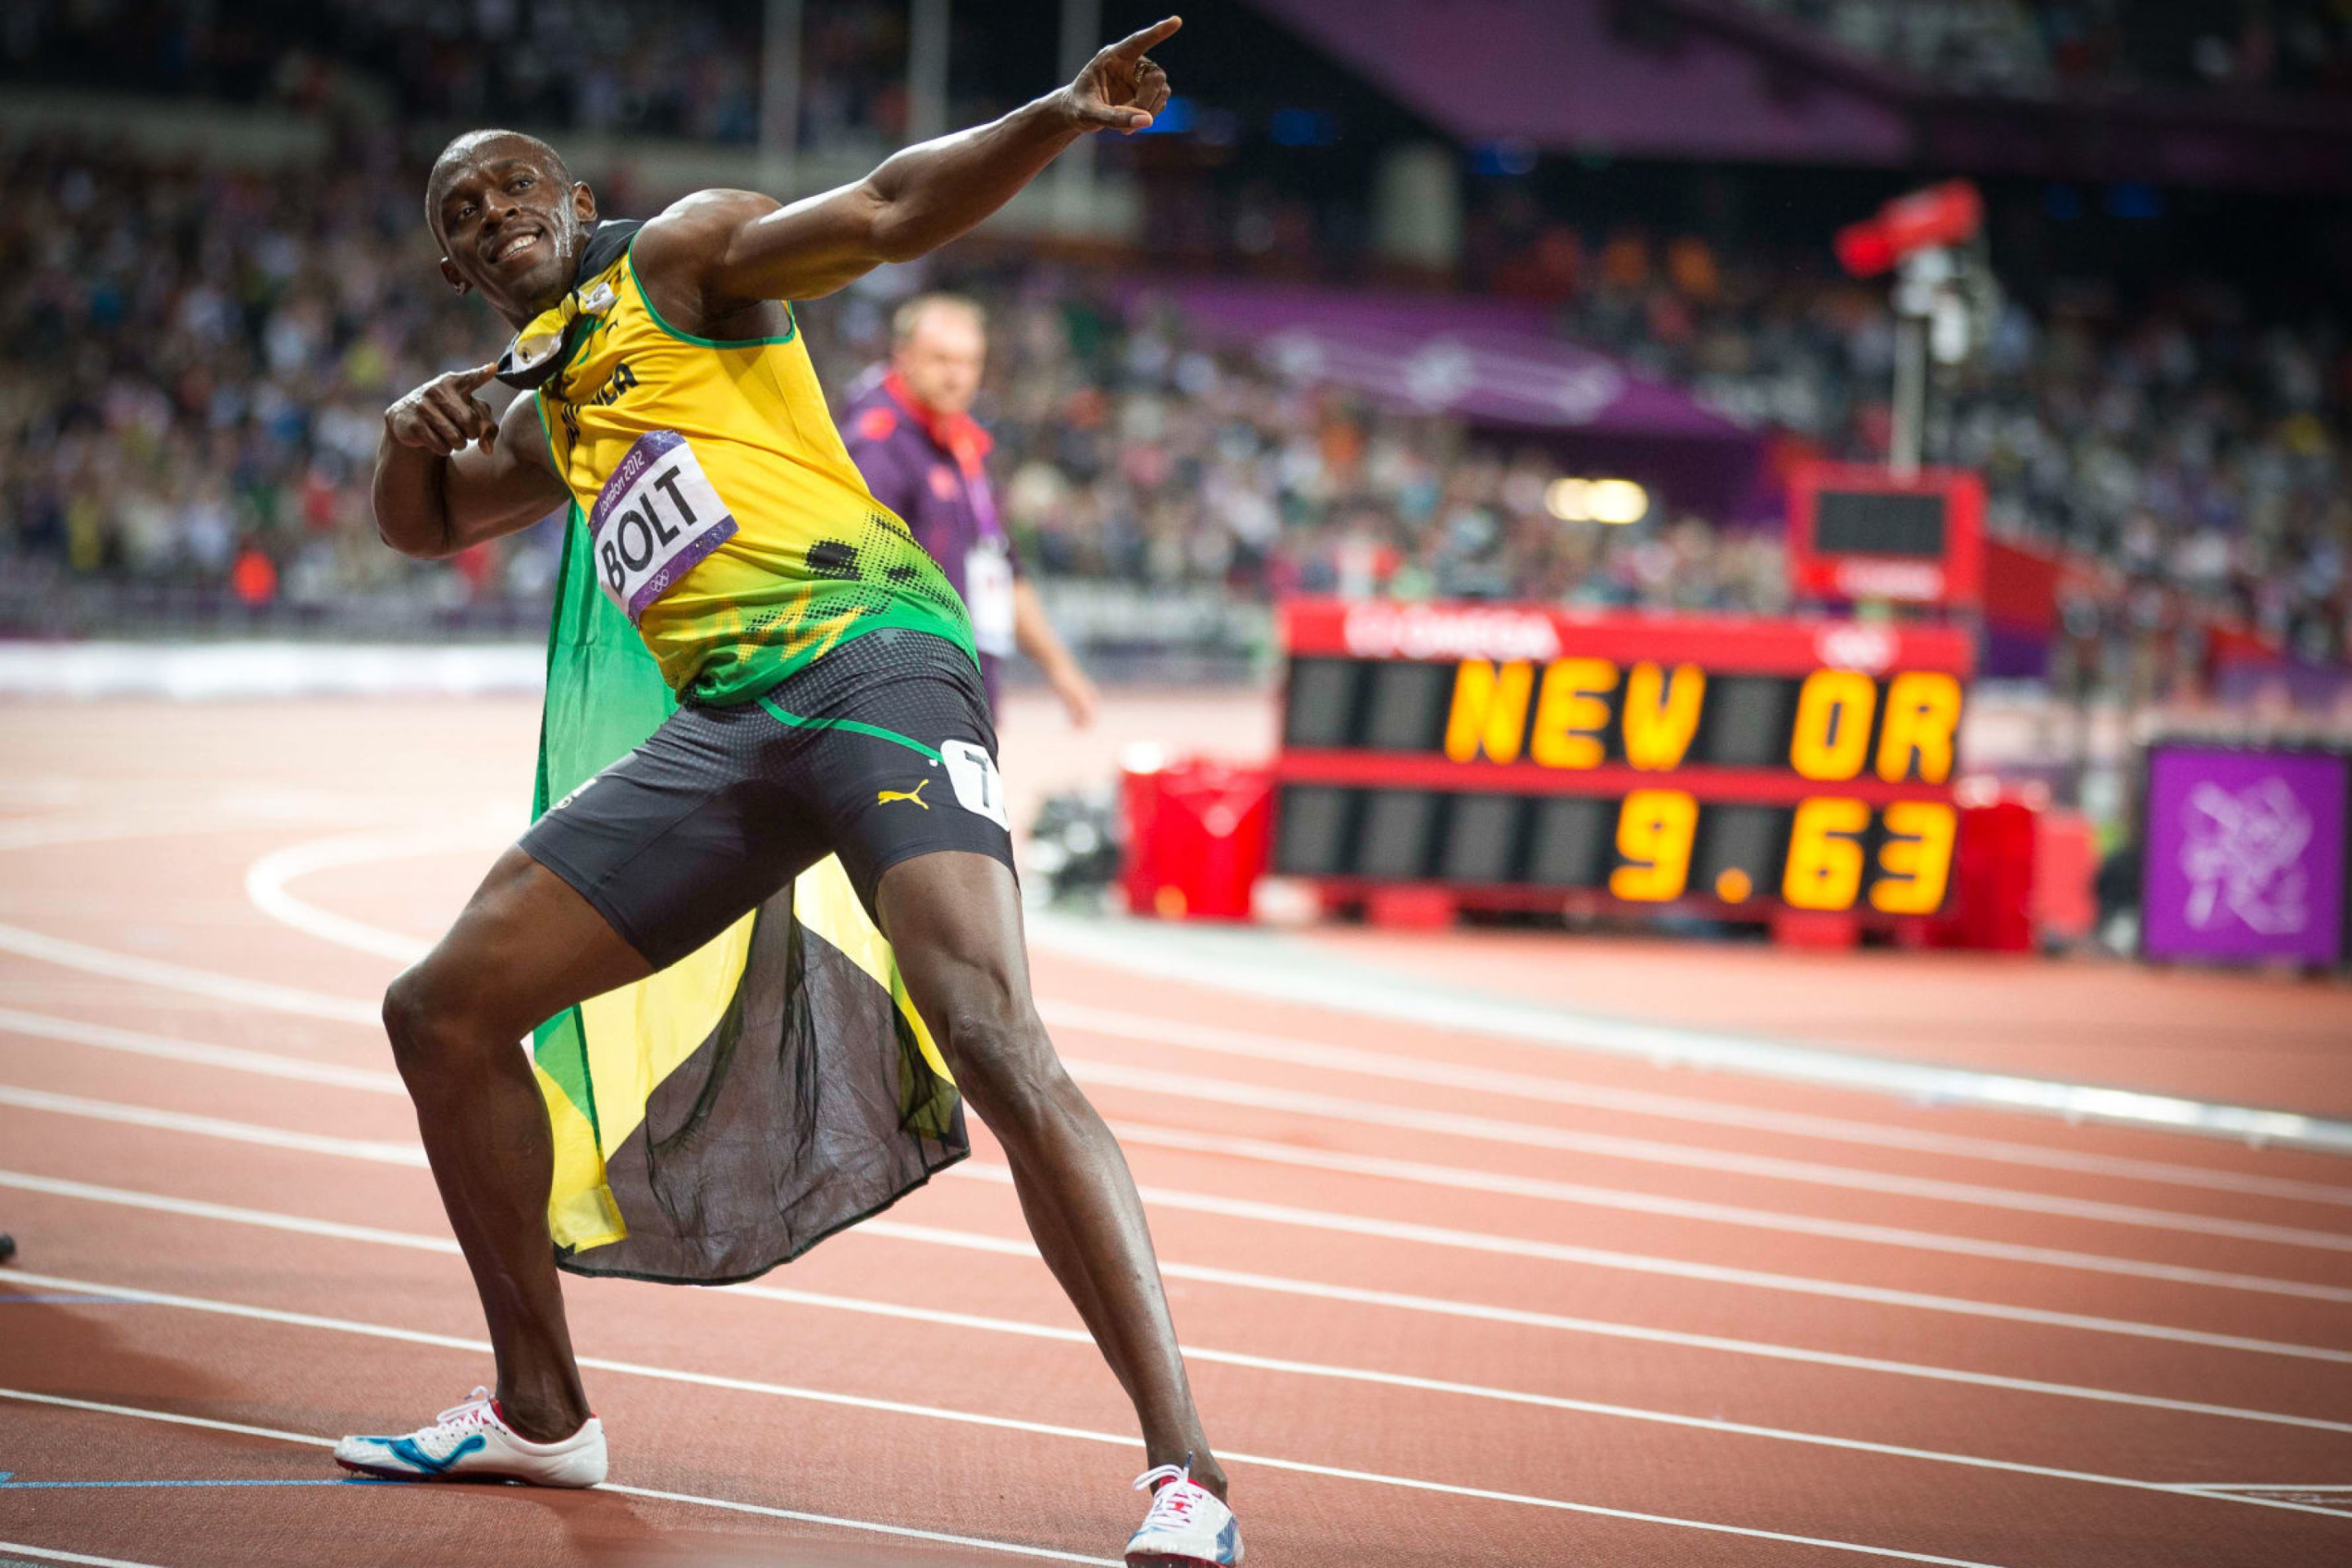 Usain Bolt won medals in the Olympics wallpaper 2880x1920